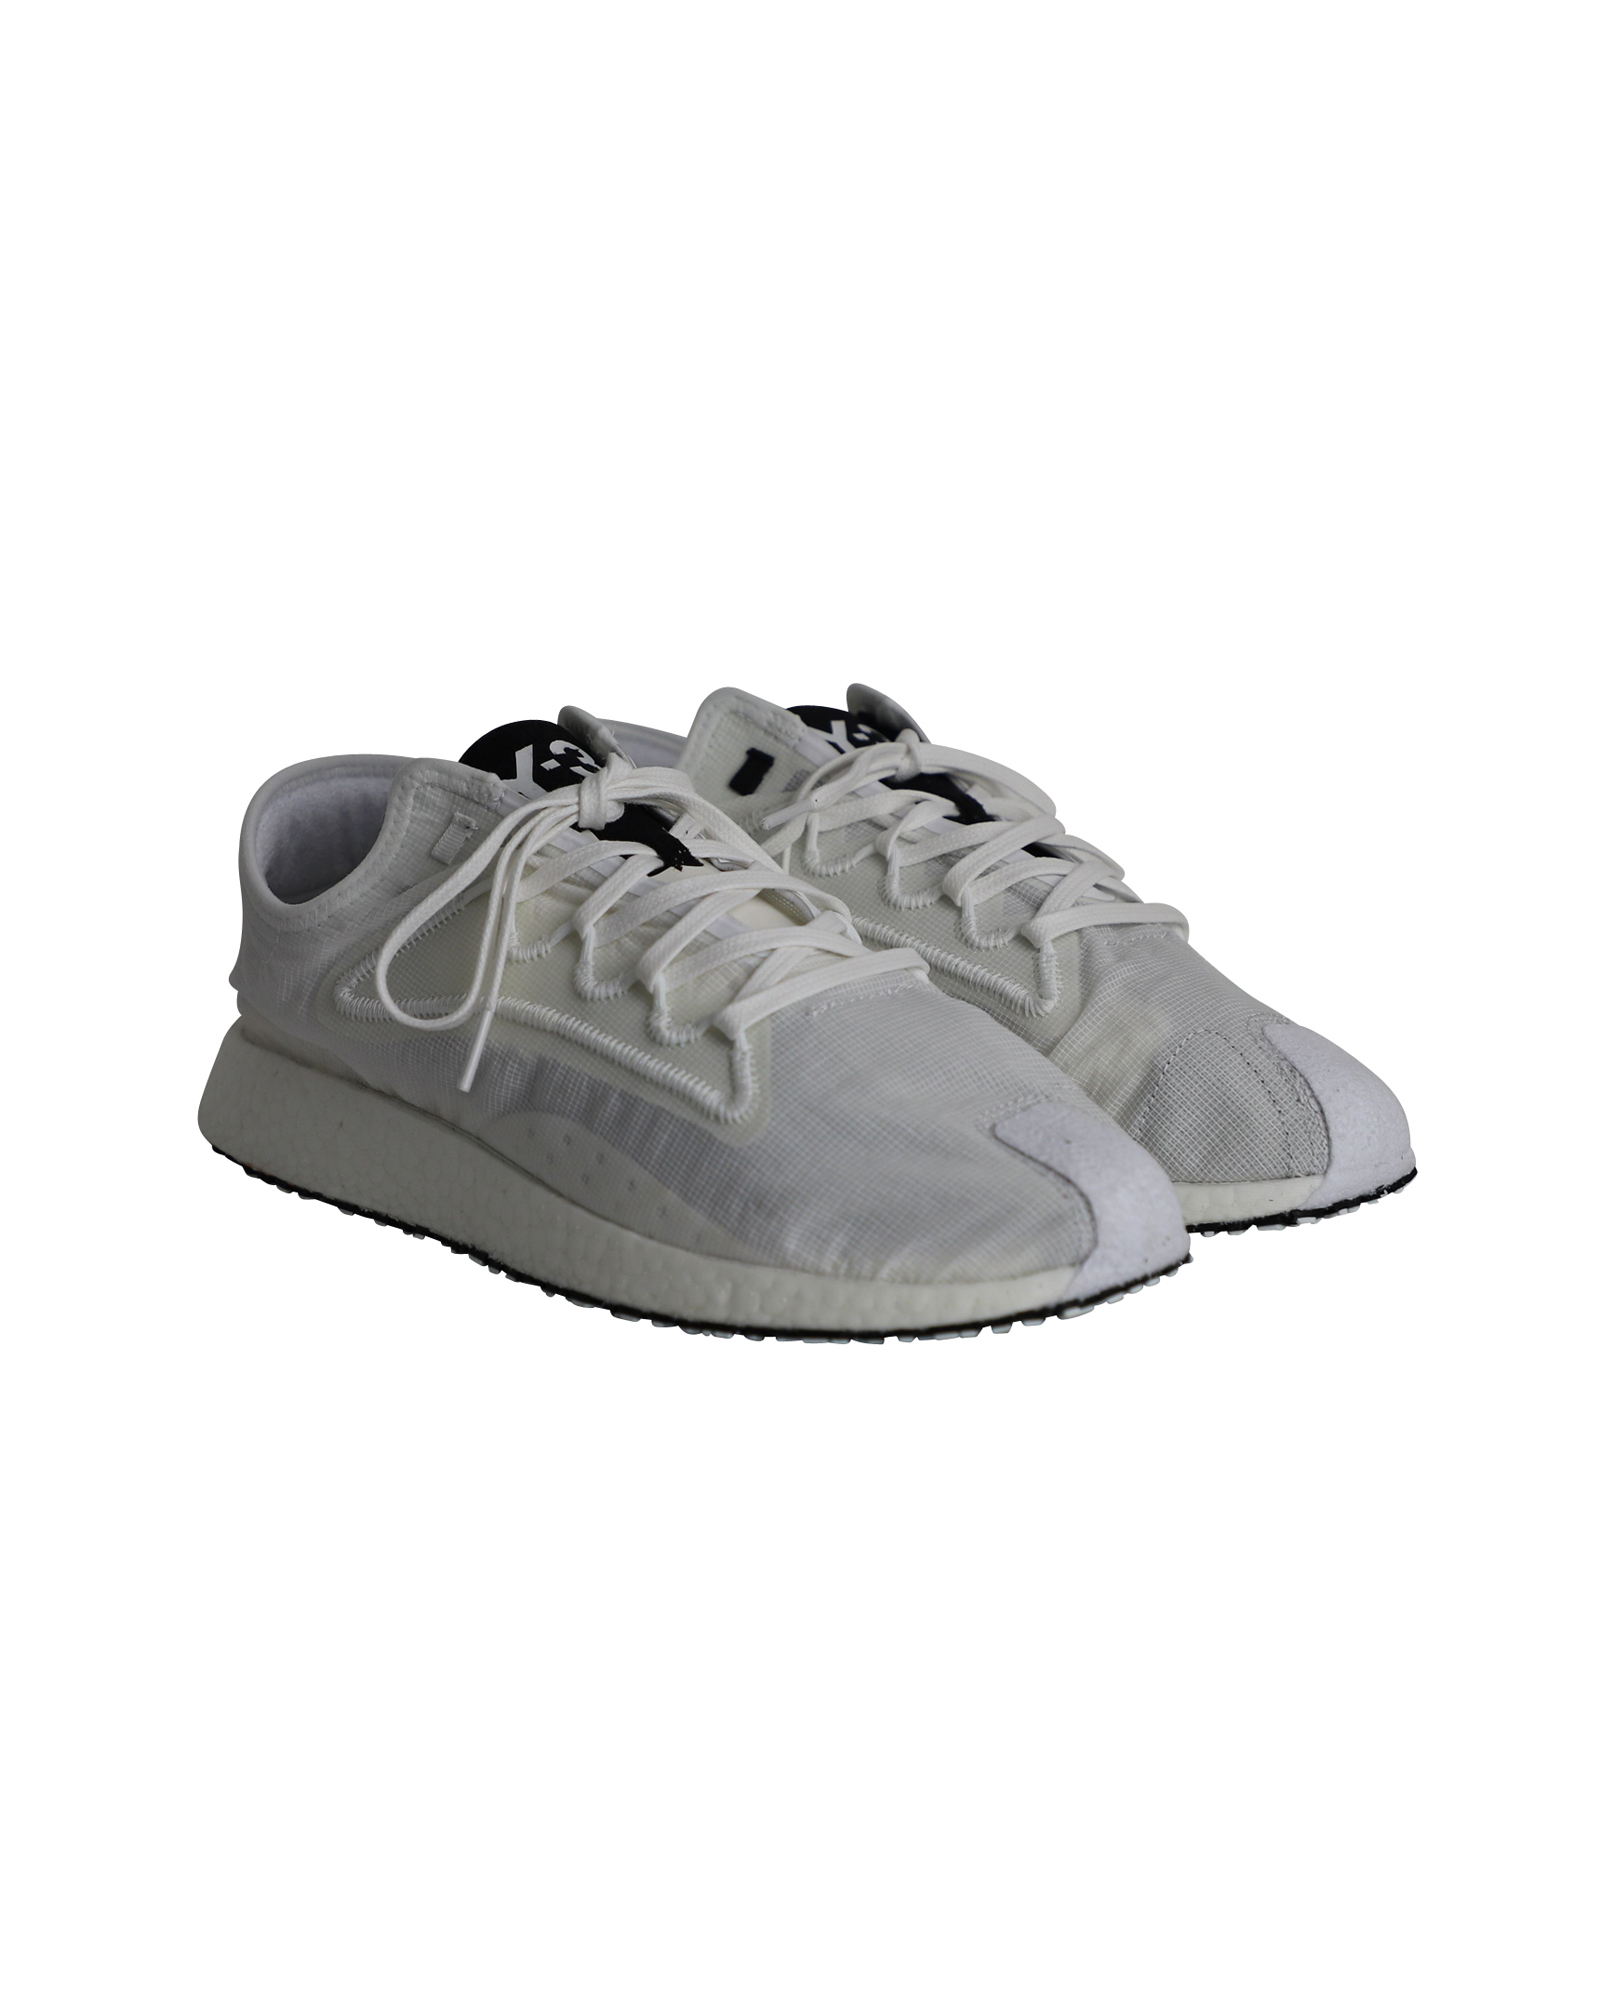 Lightweight White Low Top Sneakers with Boost Cushioning